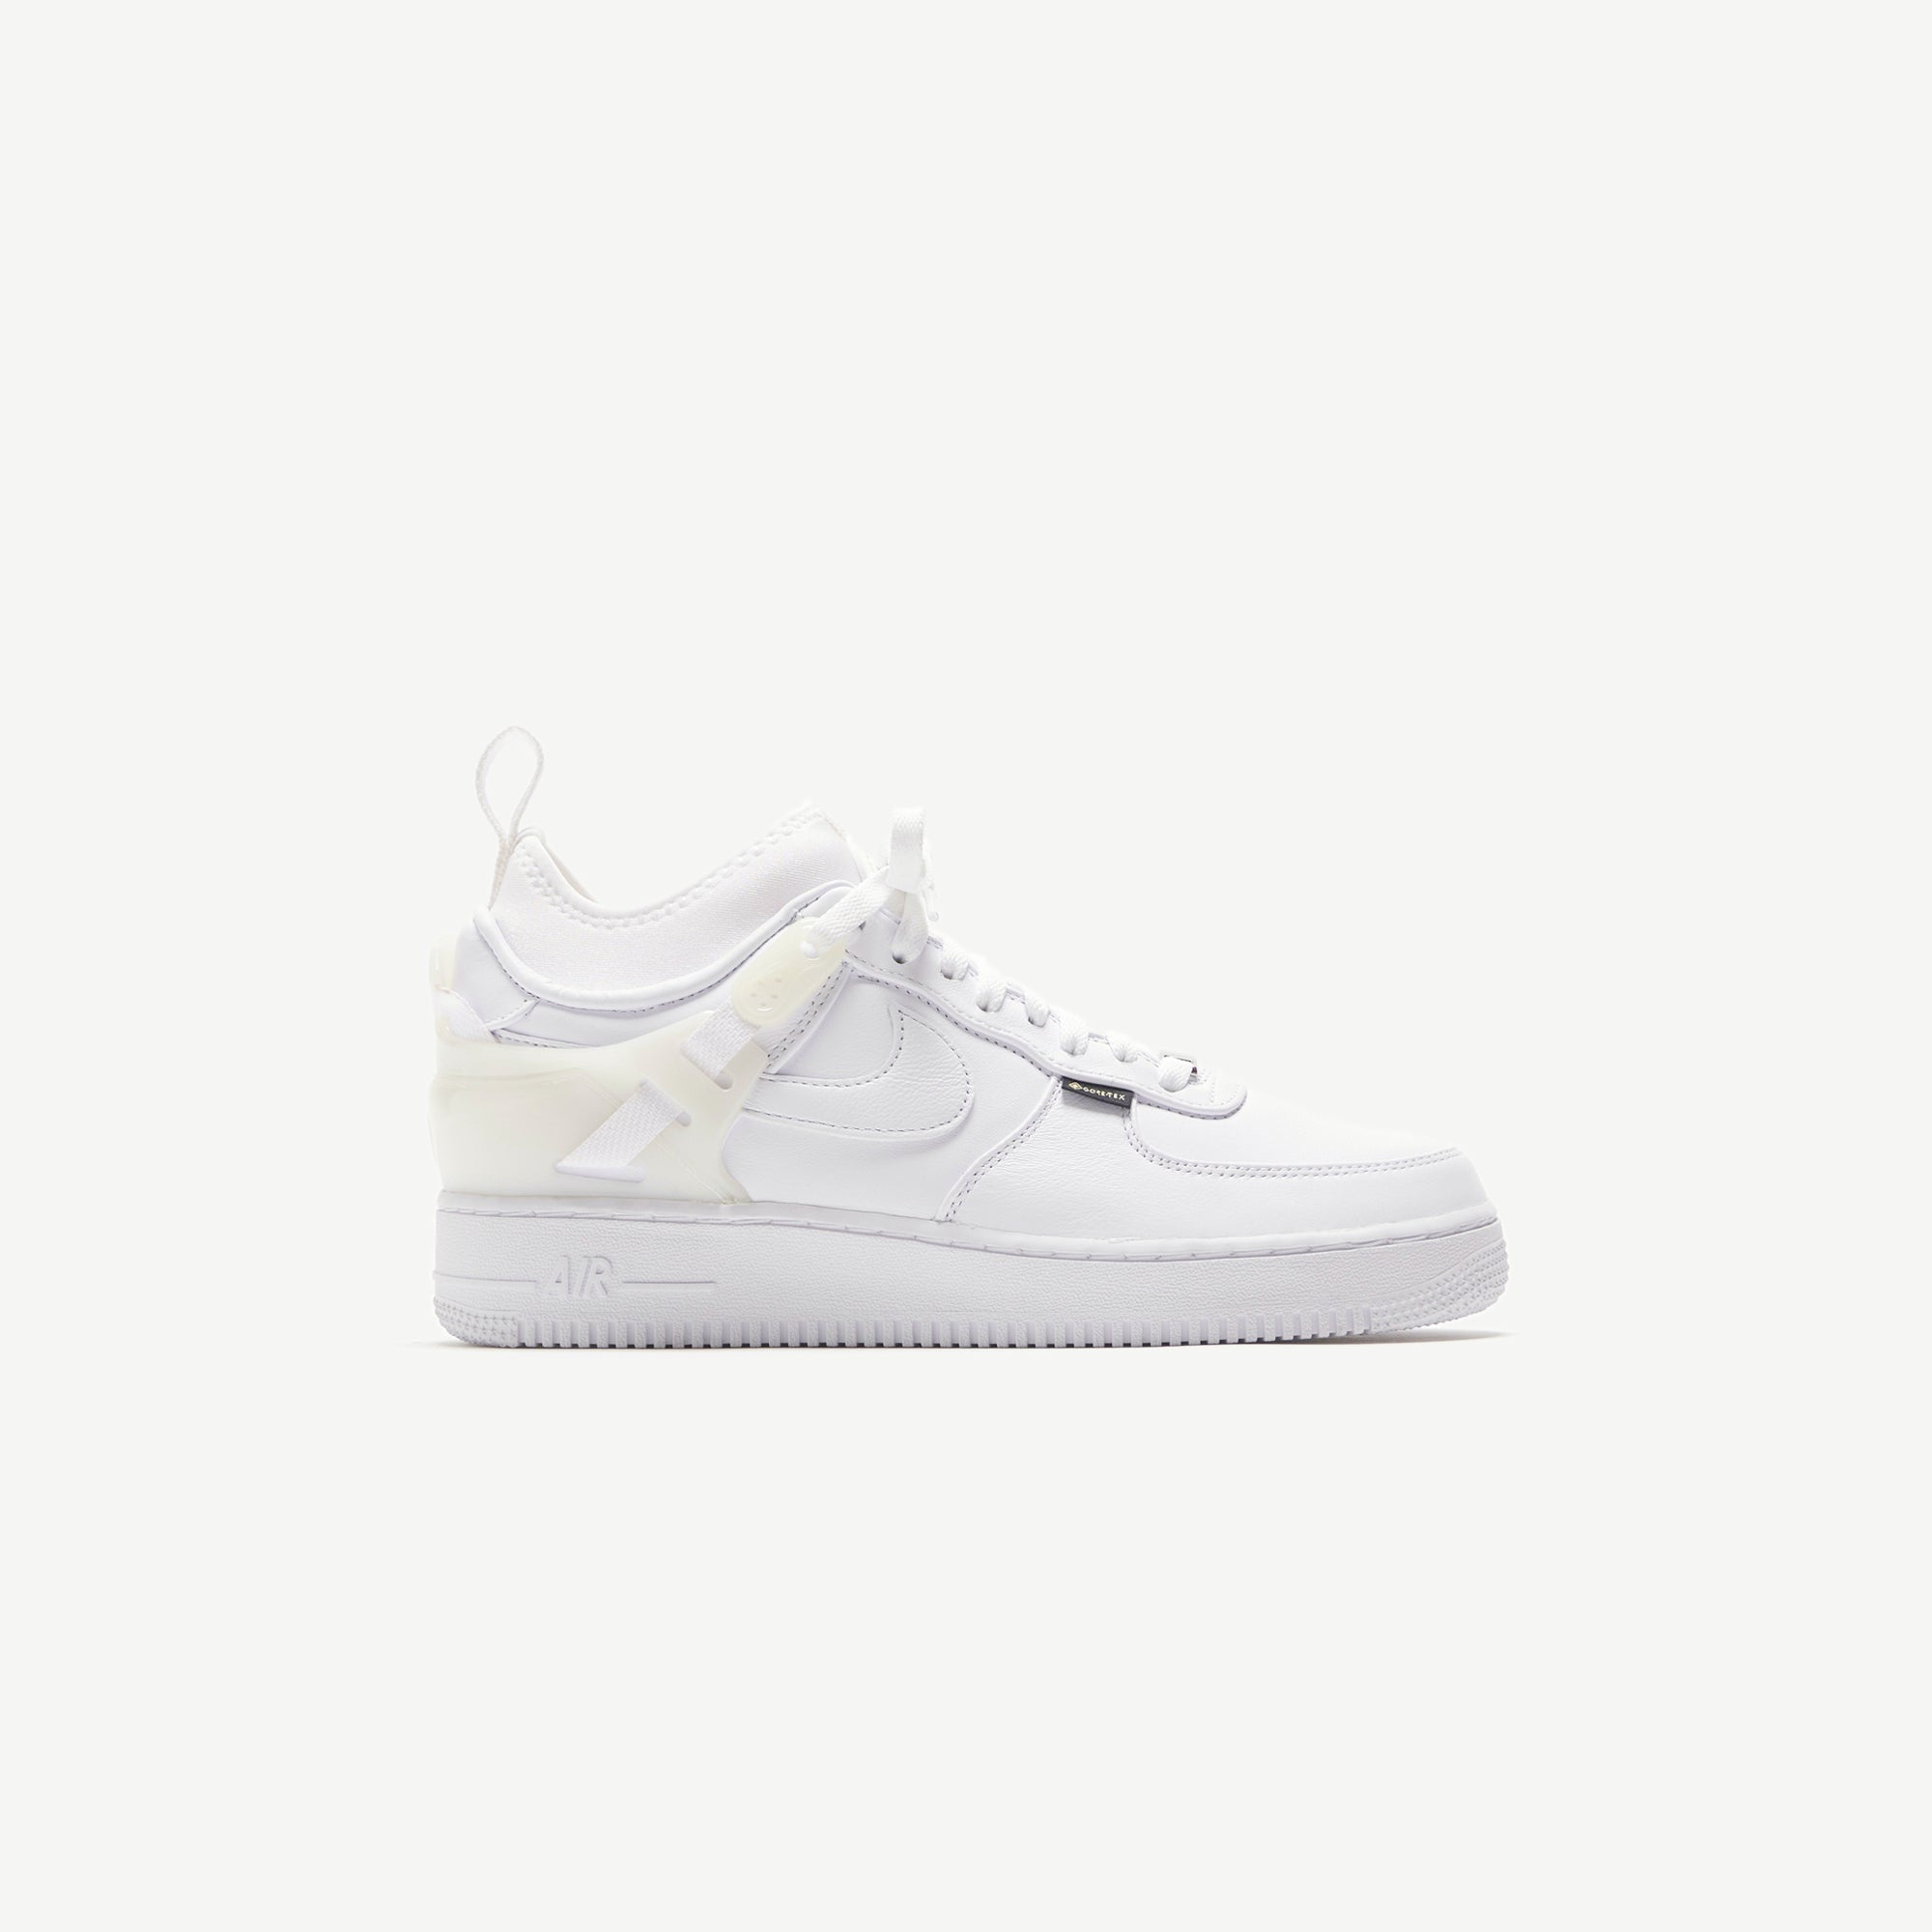 Nike x Undercover Air Force 1 Low SP - White / Sail – Kith